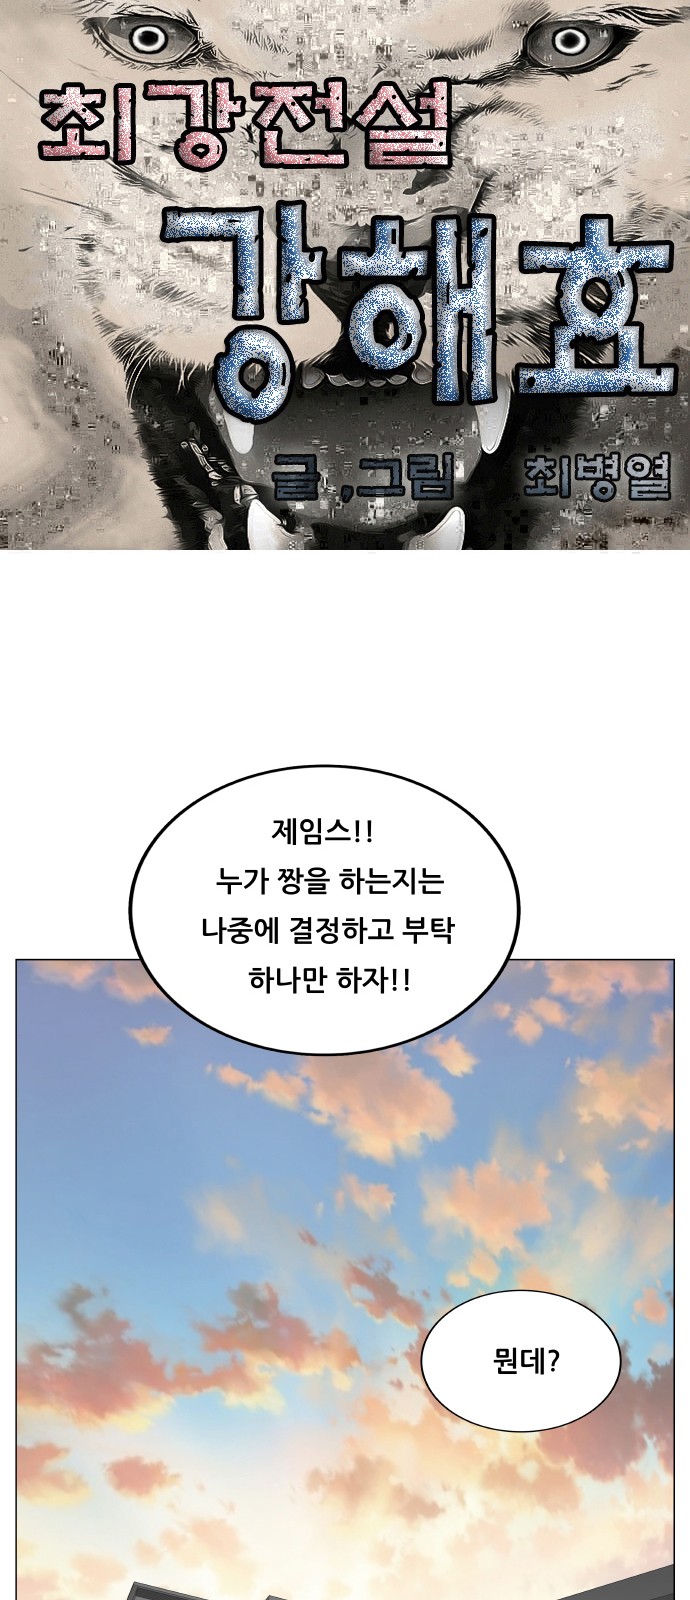 Ultimate Legend - Kang Hae Hyo - Chapter 481 - Page 1